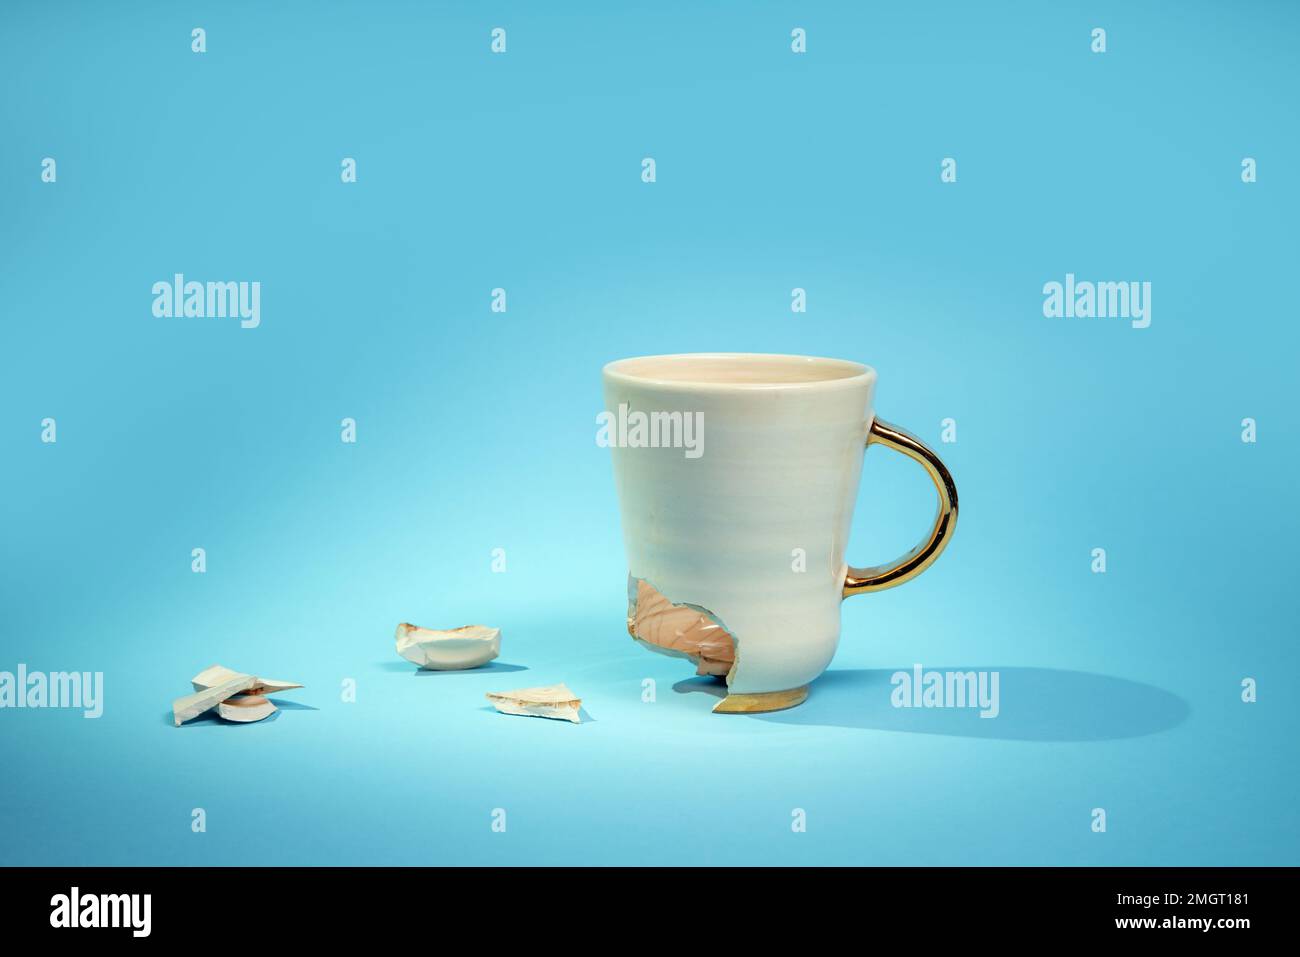 Broken tea cup isolated on blue background. Cracked coffee mug and ...